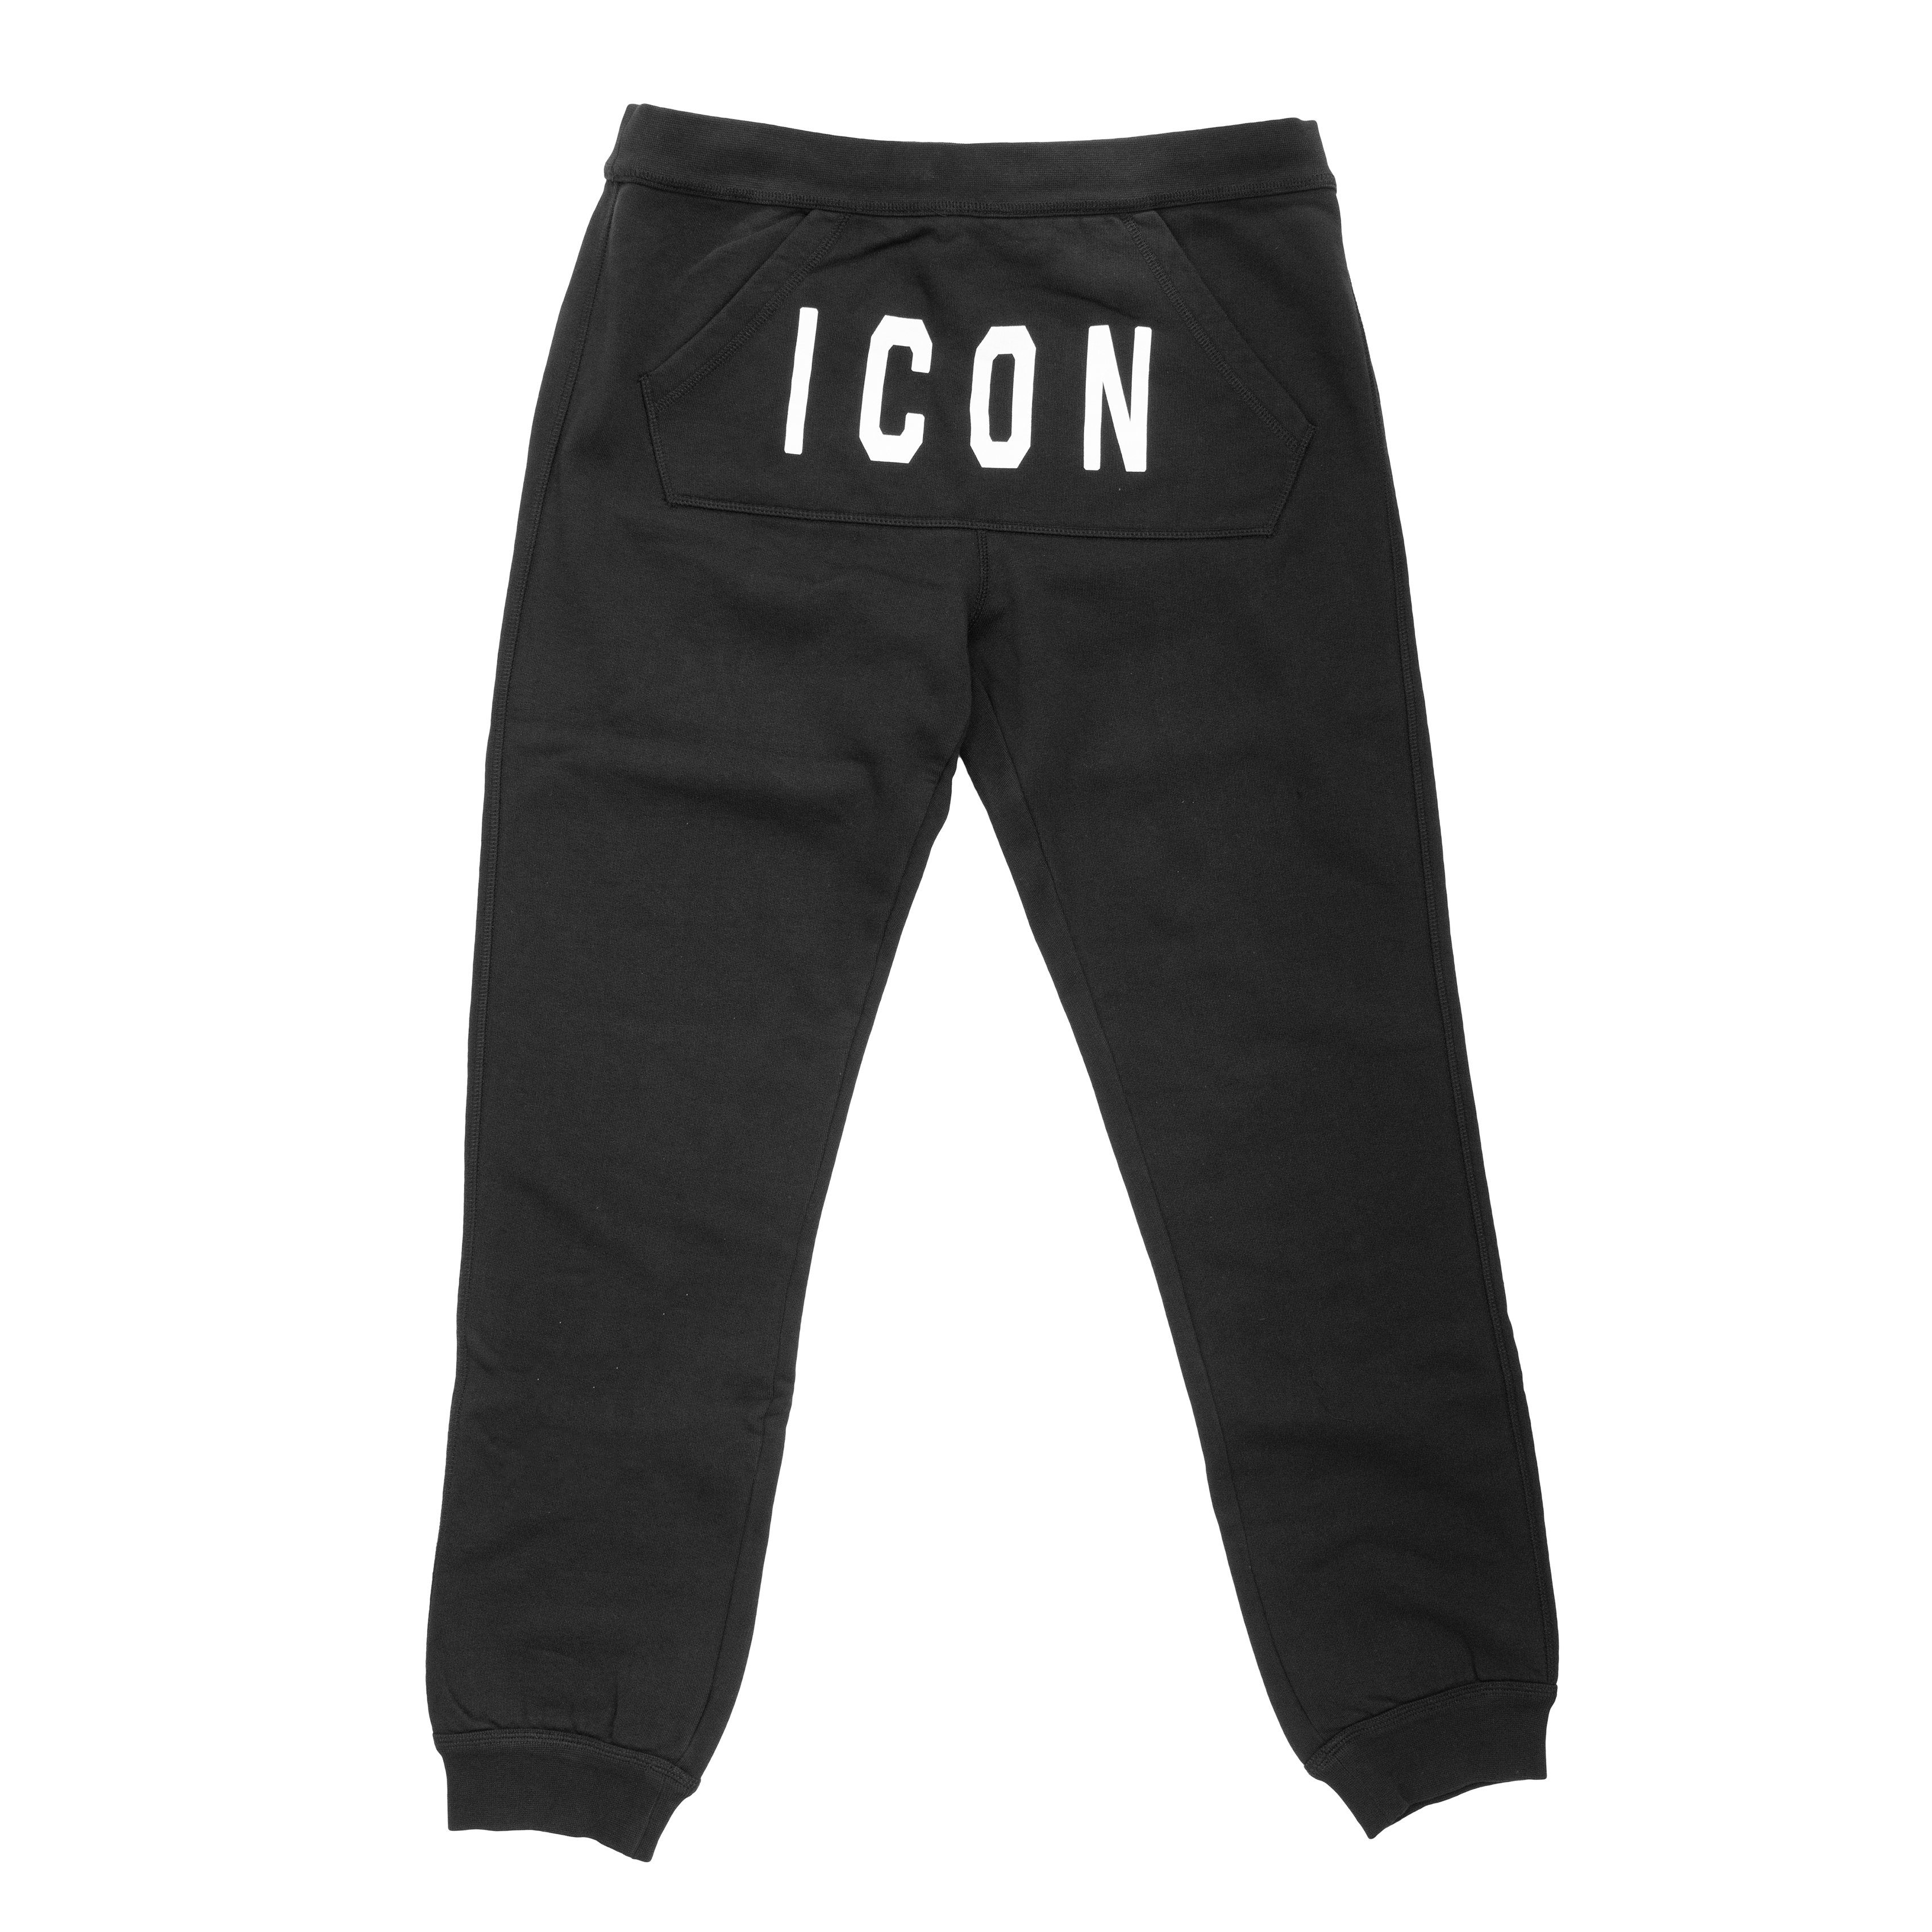 Dsquared2 Jogginghose »ICON« Schwarz, Made in Italy online kaufen | OTTO